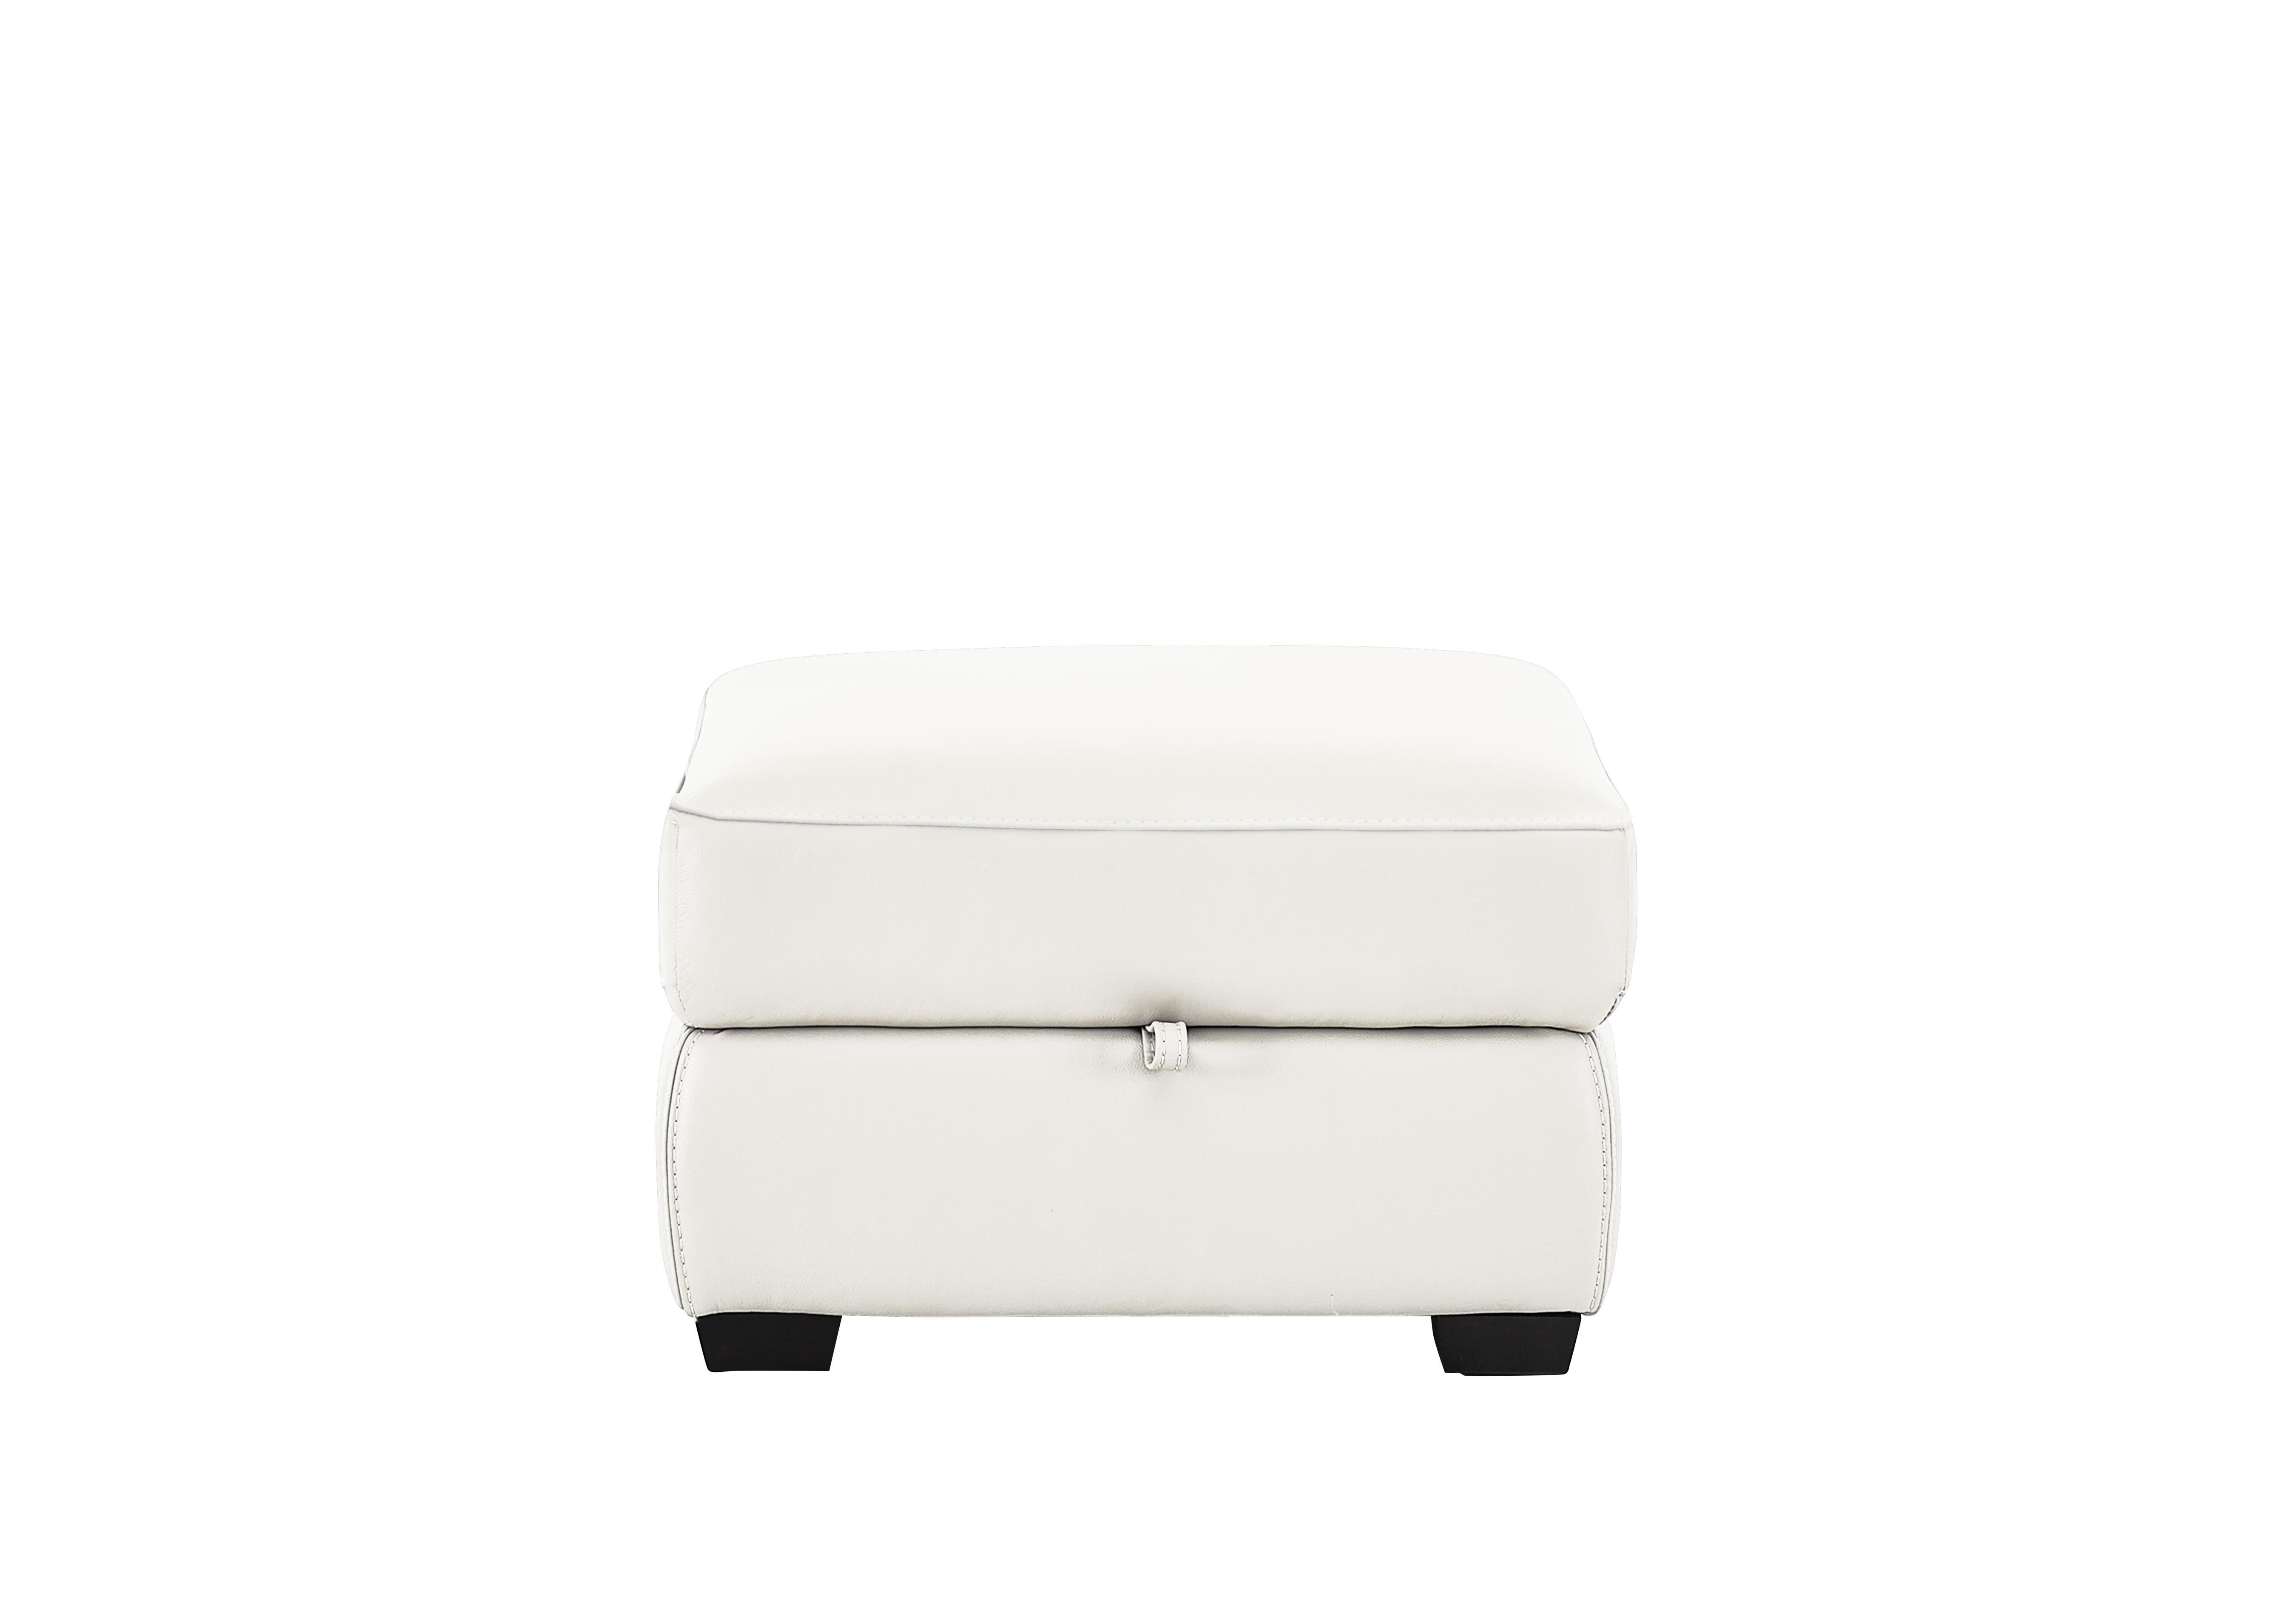 Starlight Express Leather Storage Footstool in Bv-744d Star White on Furniture Village